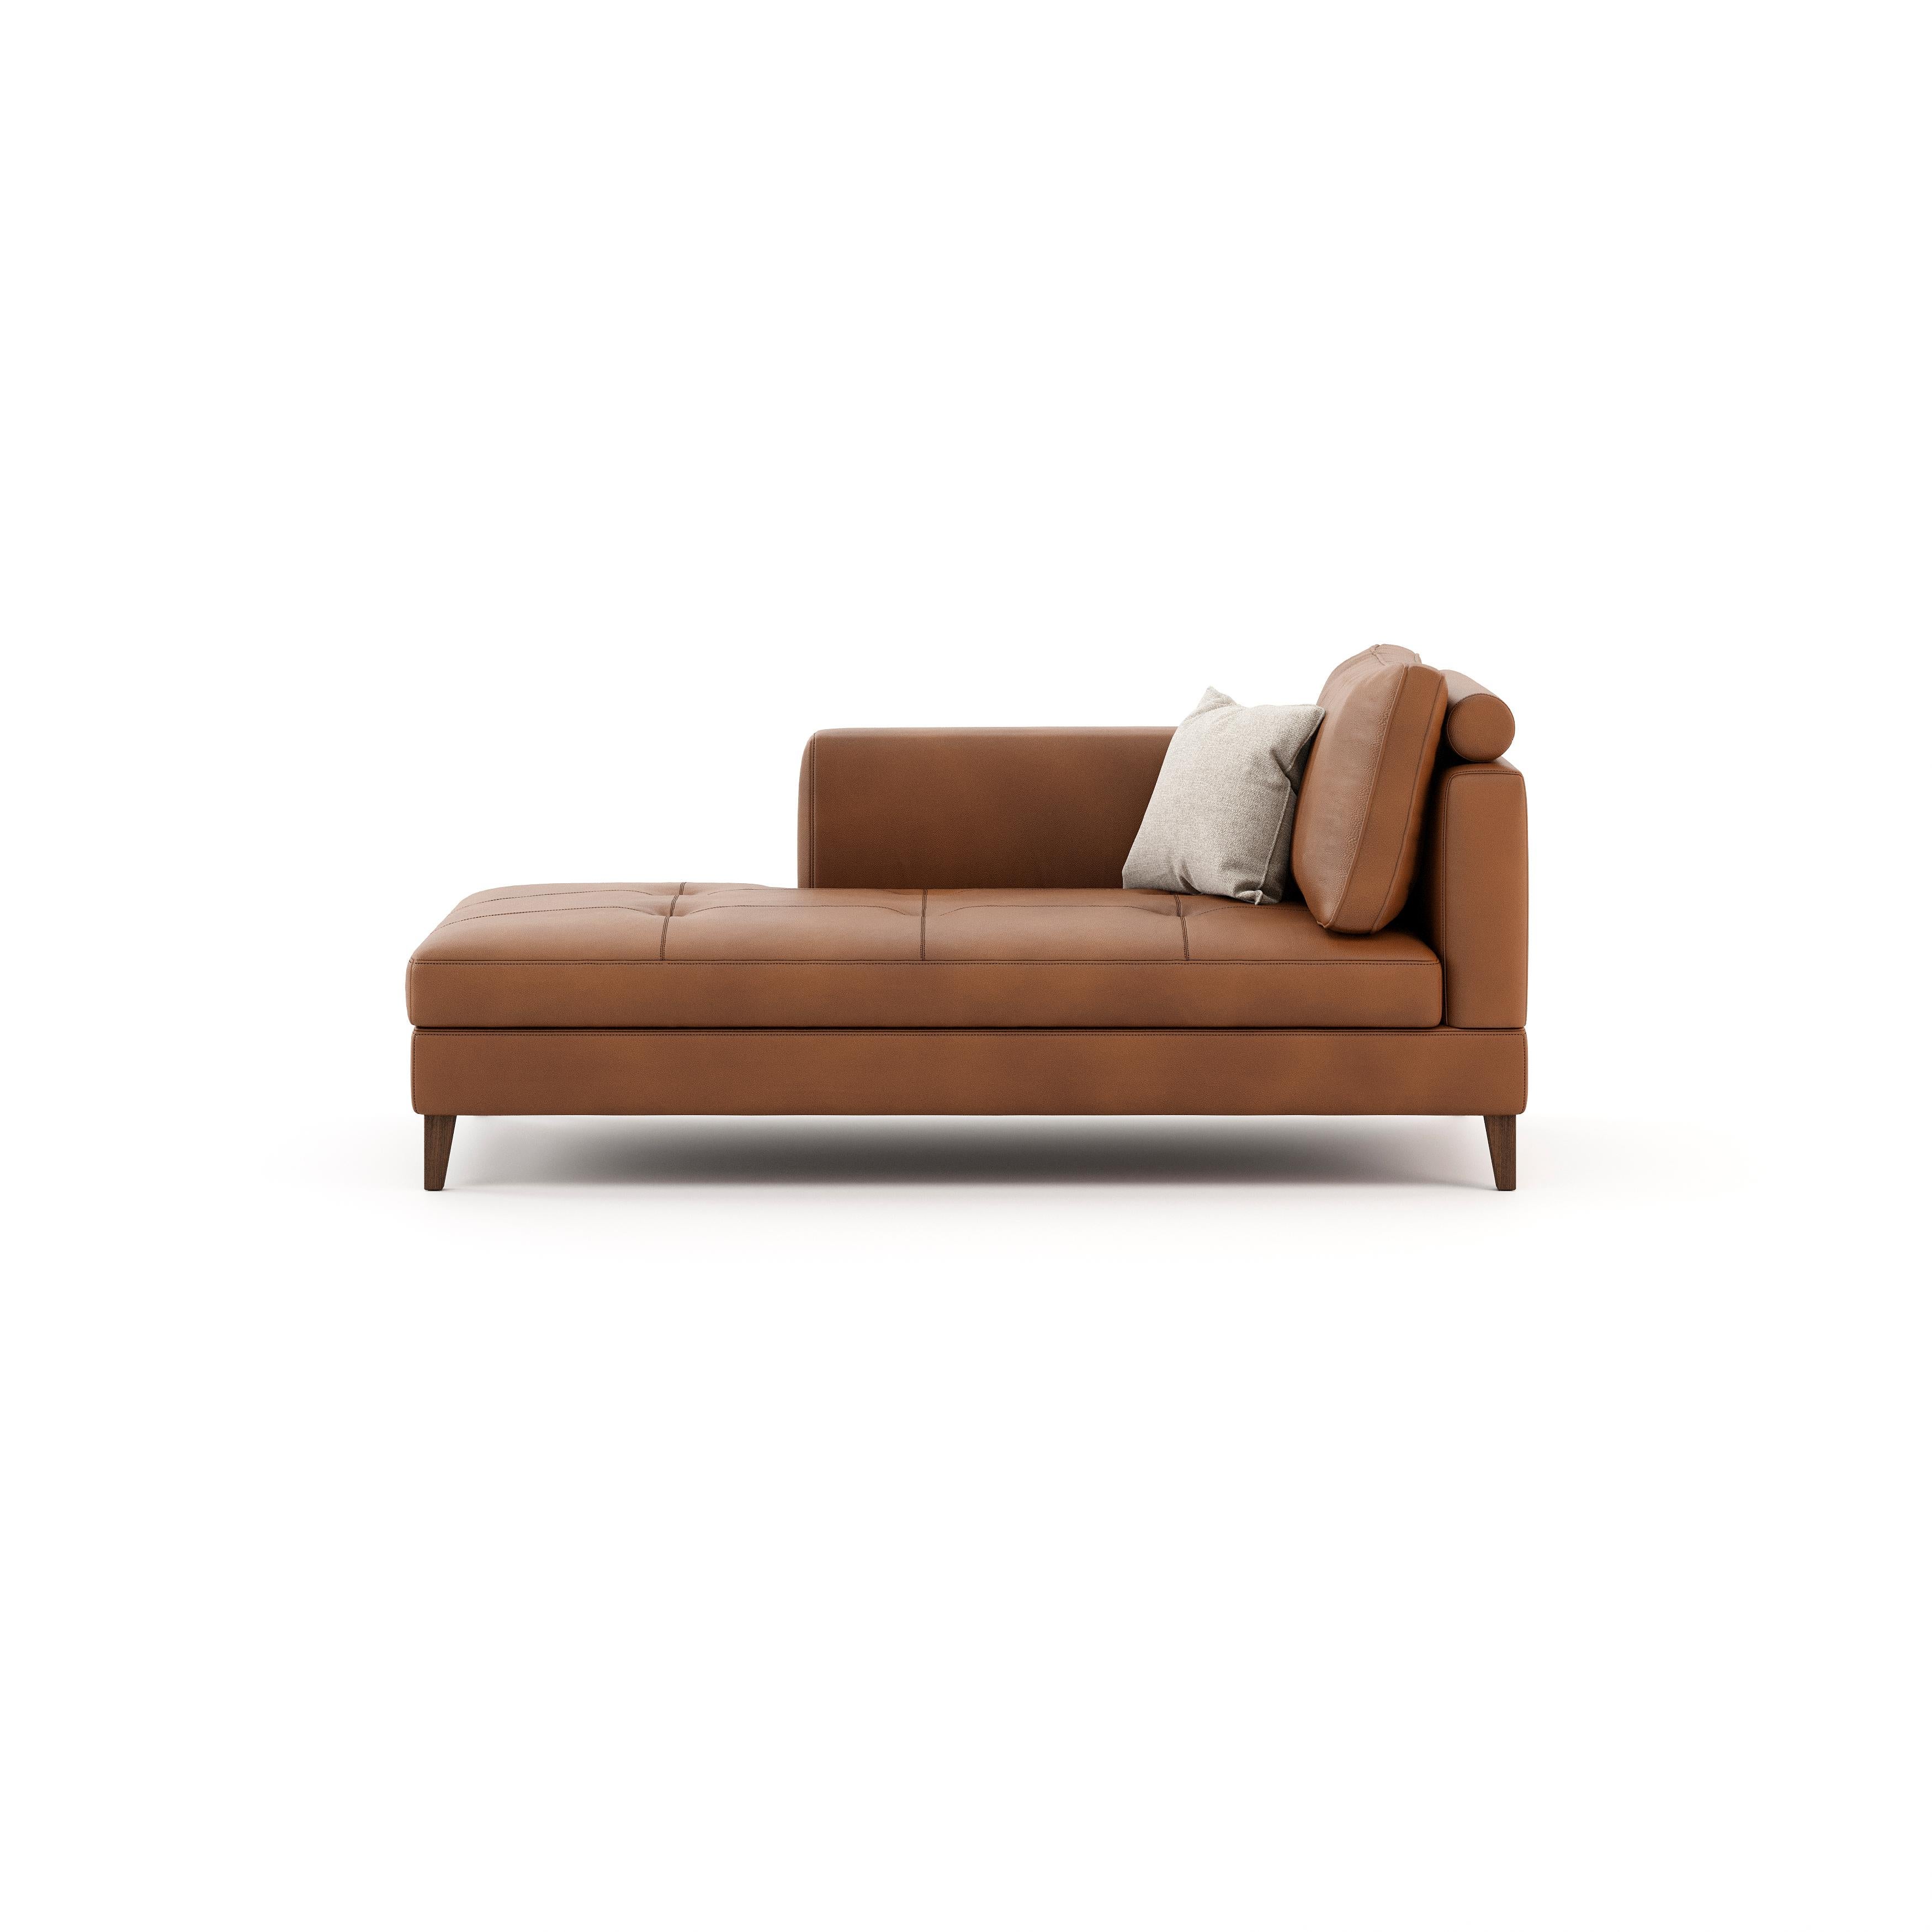 Karin chaise longue is the perfect piece to add timeless style and glamour to living rooms, entrance halls and bedrooms. This versatile chaise longue features an armrest and backrest, providing maximum comfort.


* Available in different